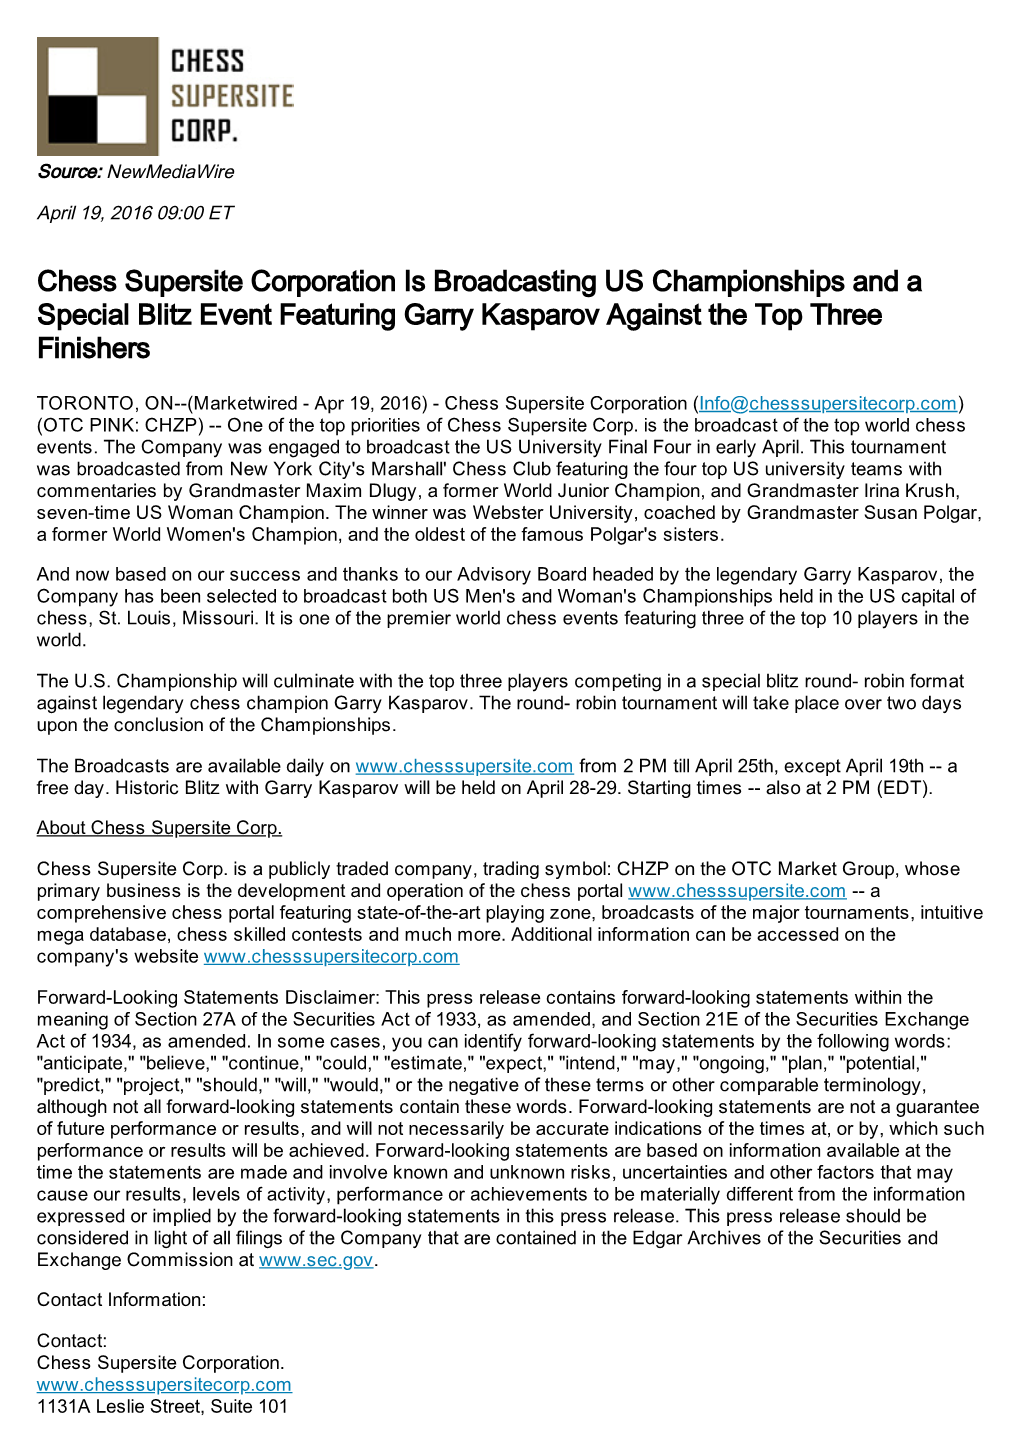 Chess Supersite Corporation Is Broadcasting US Championships and a Special Blitz Event Featuring Garry Kasparov Against the Top Three Finishers